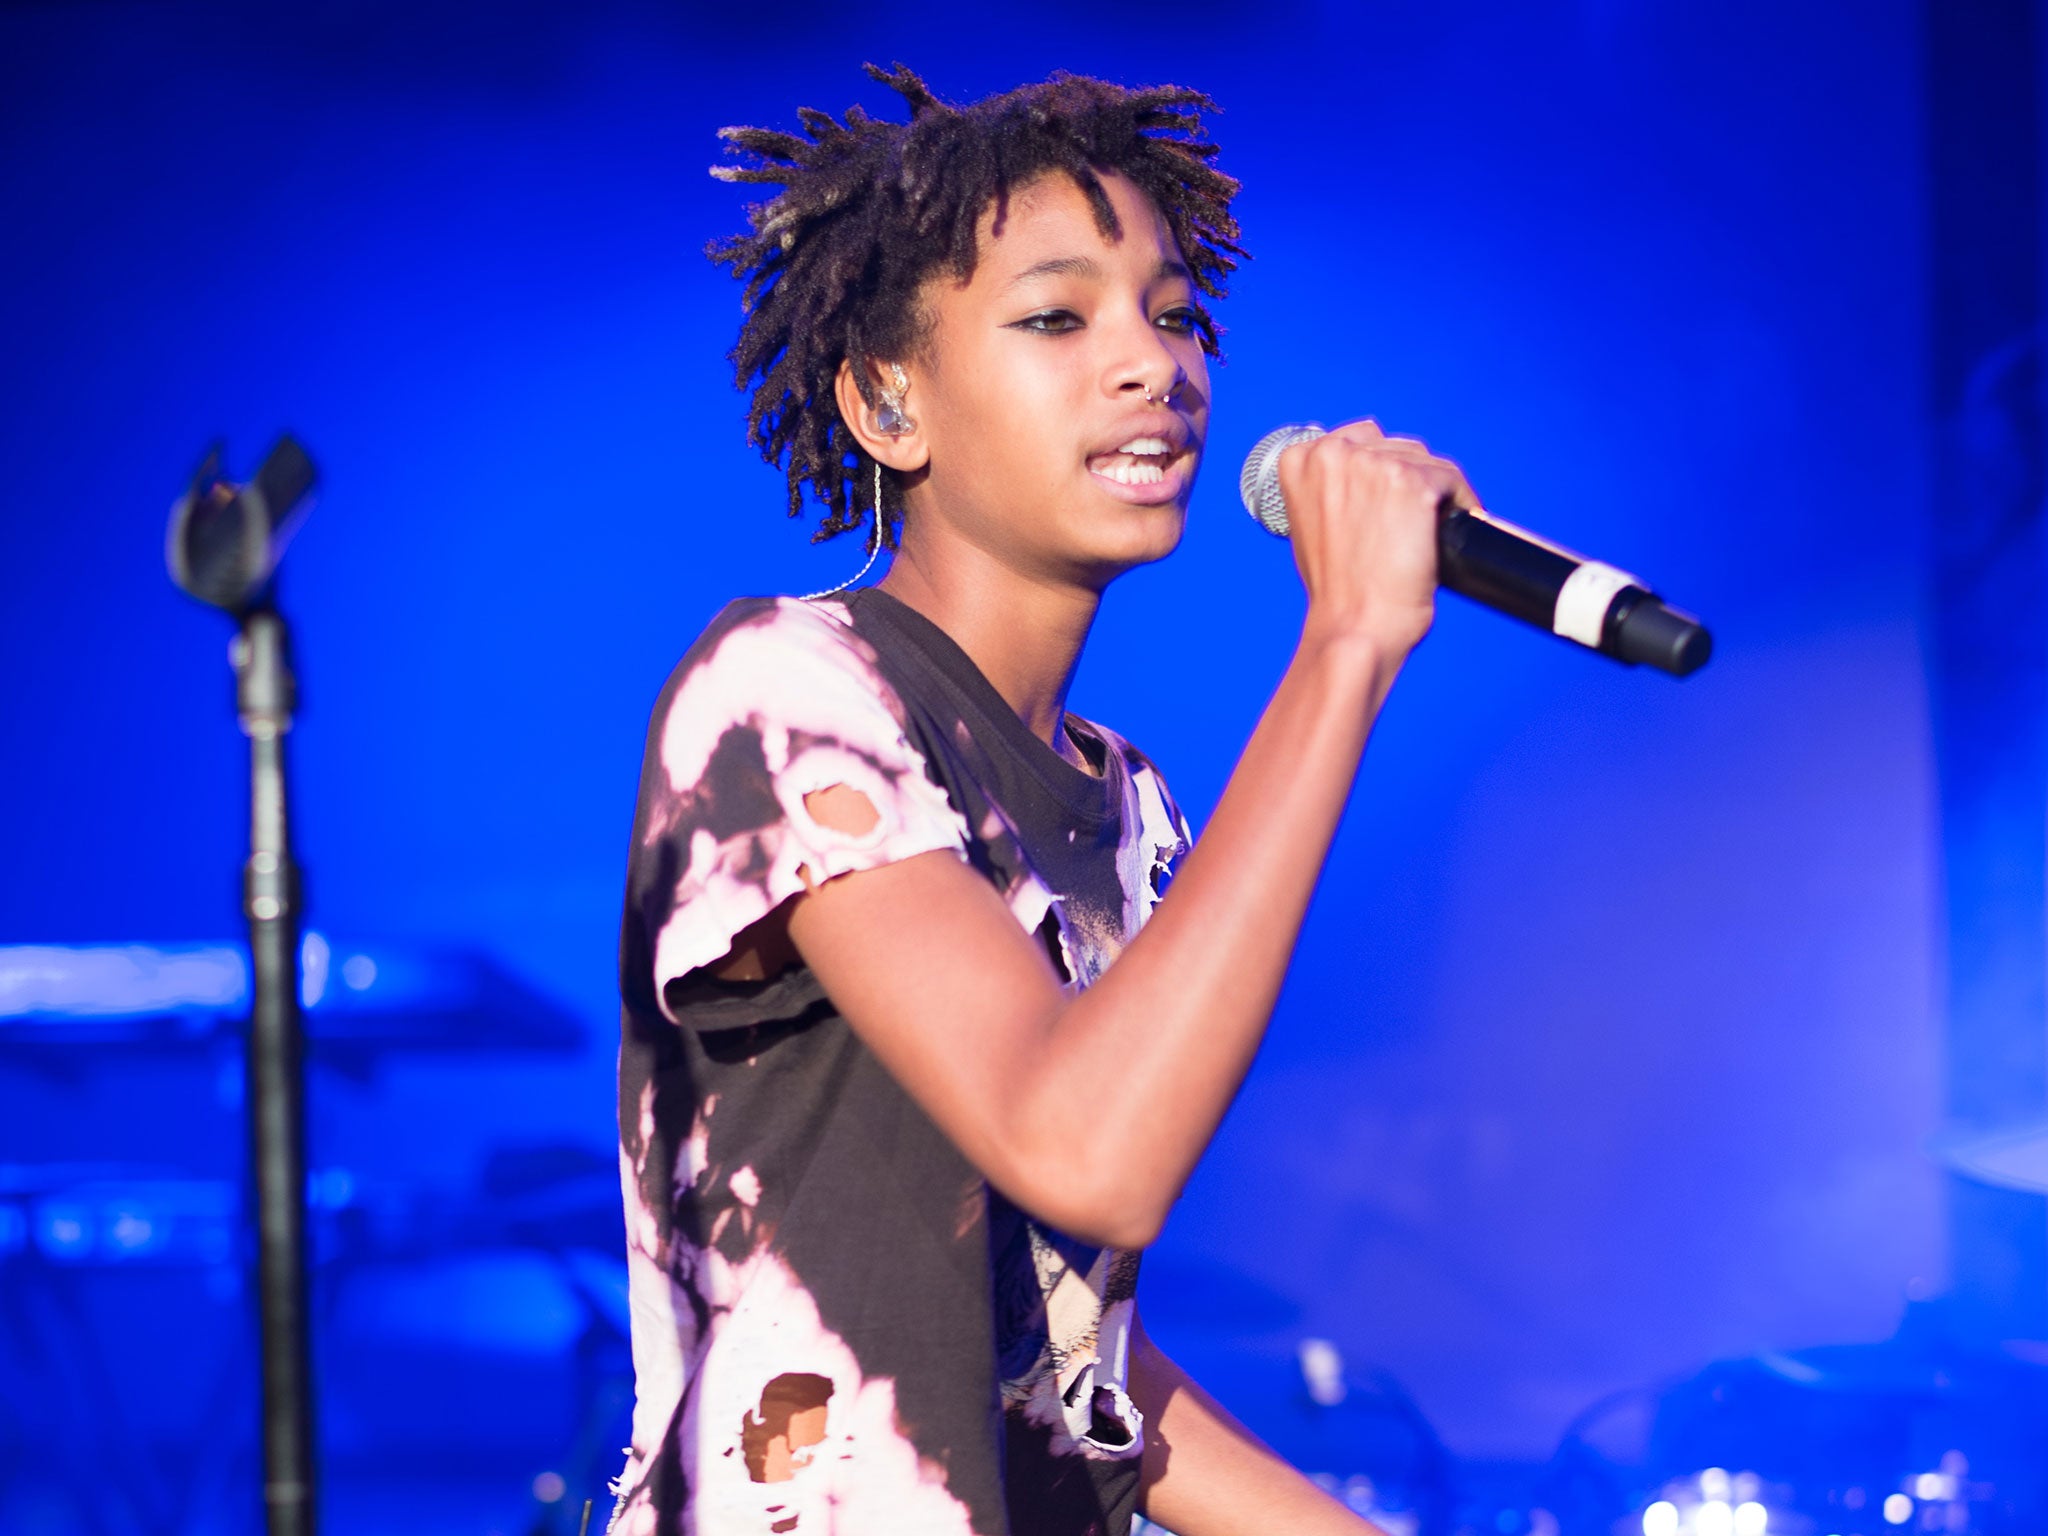 Standing out from the crowd: Willow Smith, actress, dancer and "21st Century Girl" singer